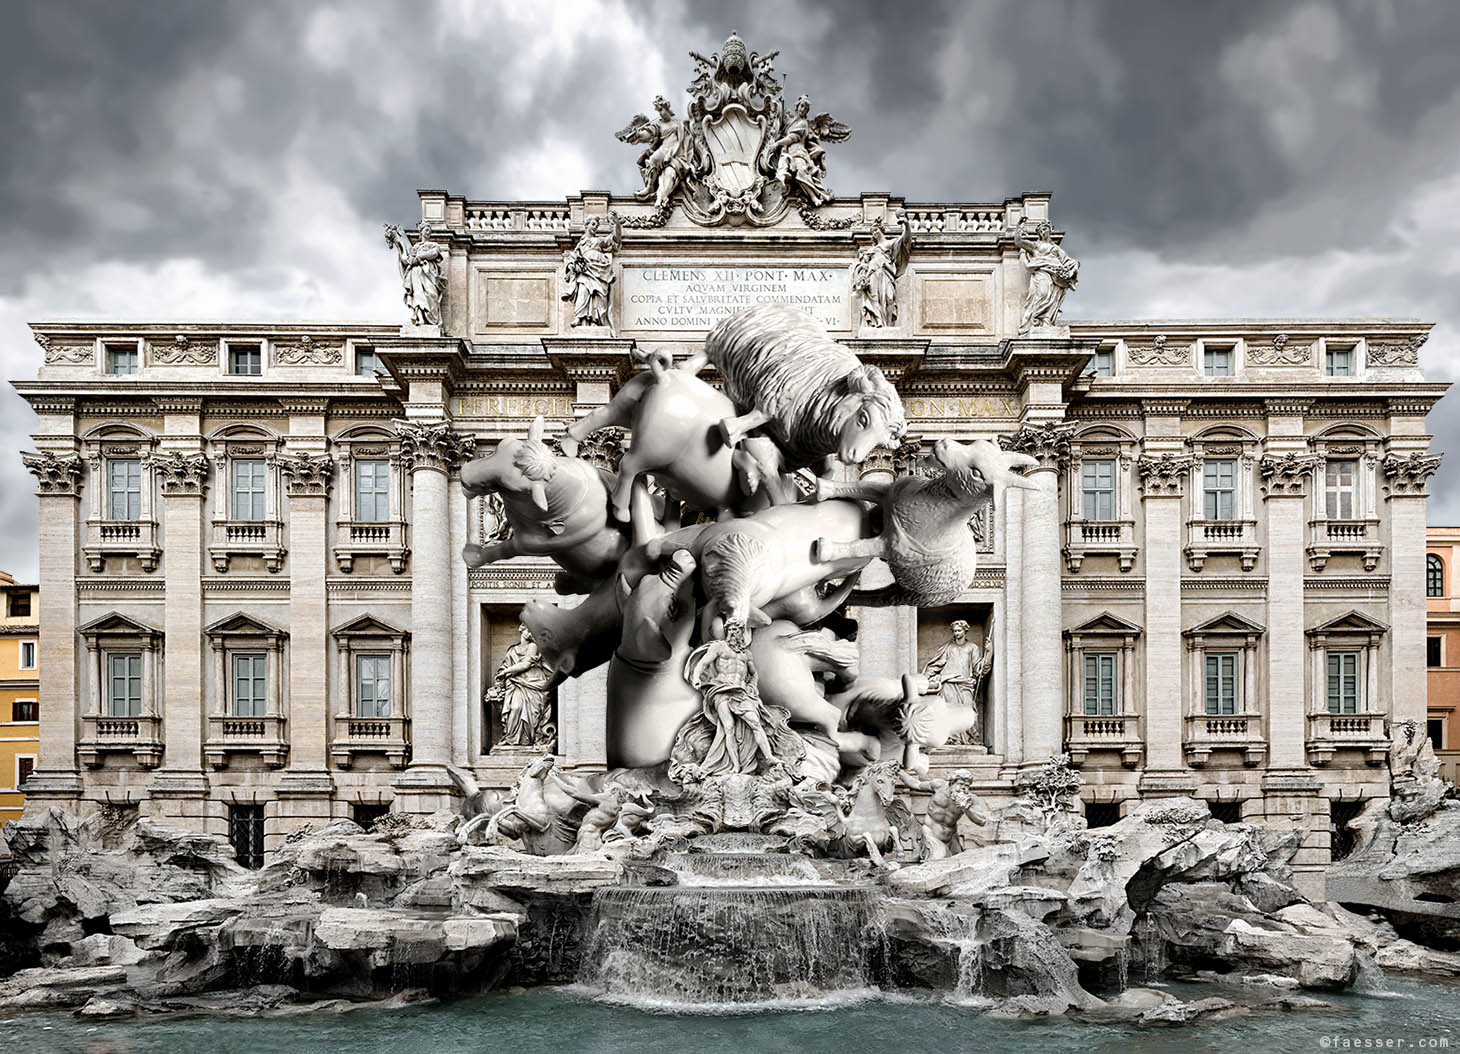 Massive Attack Rome: Landmark extension for Trevi Fountain in Rome; work of art as figurative sculpture; artist Roland Faesser, sculptor and painter 2016